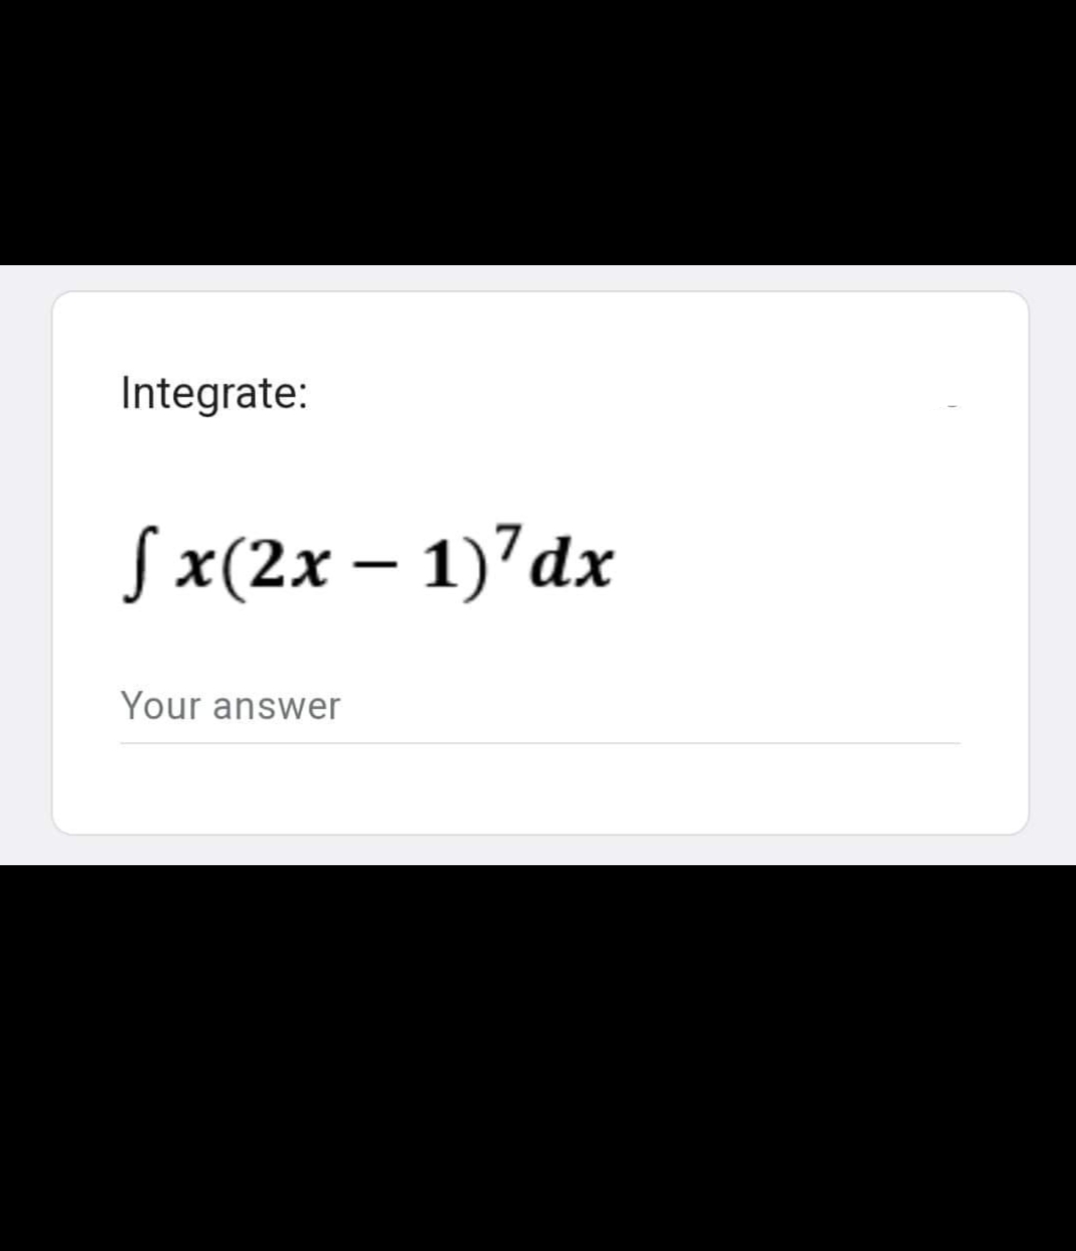 Integrate:
fx(2x - 1)7 dx
Your answer